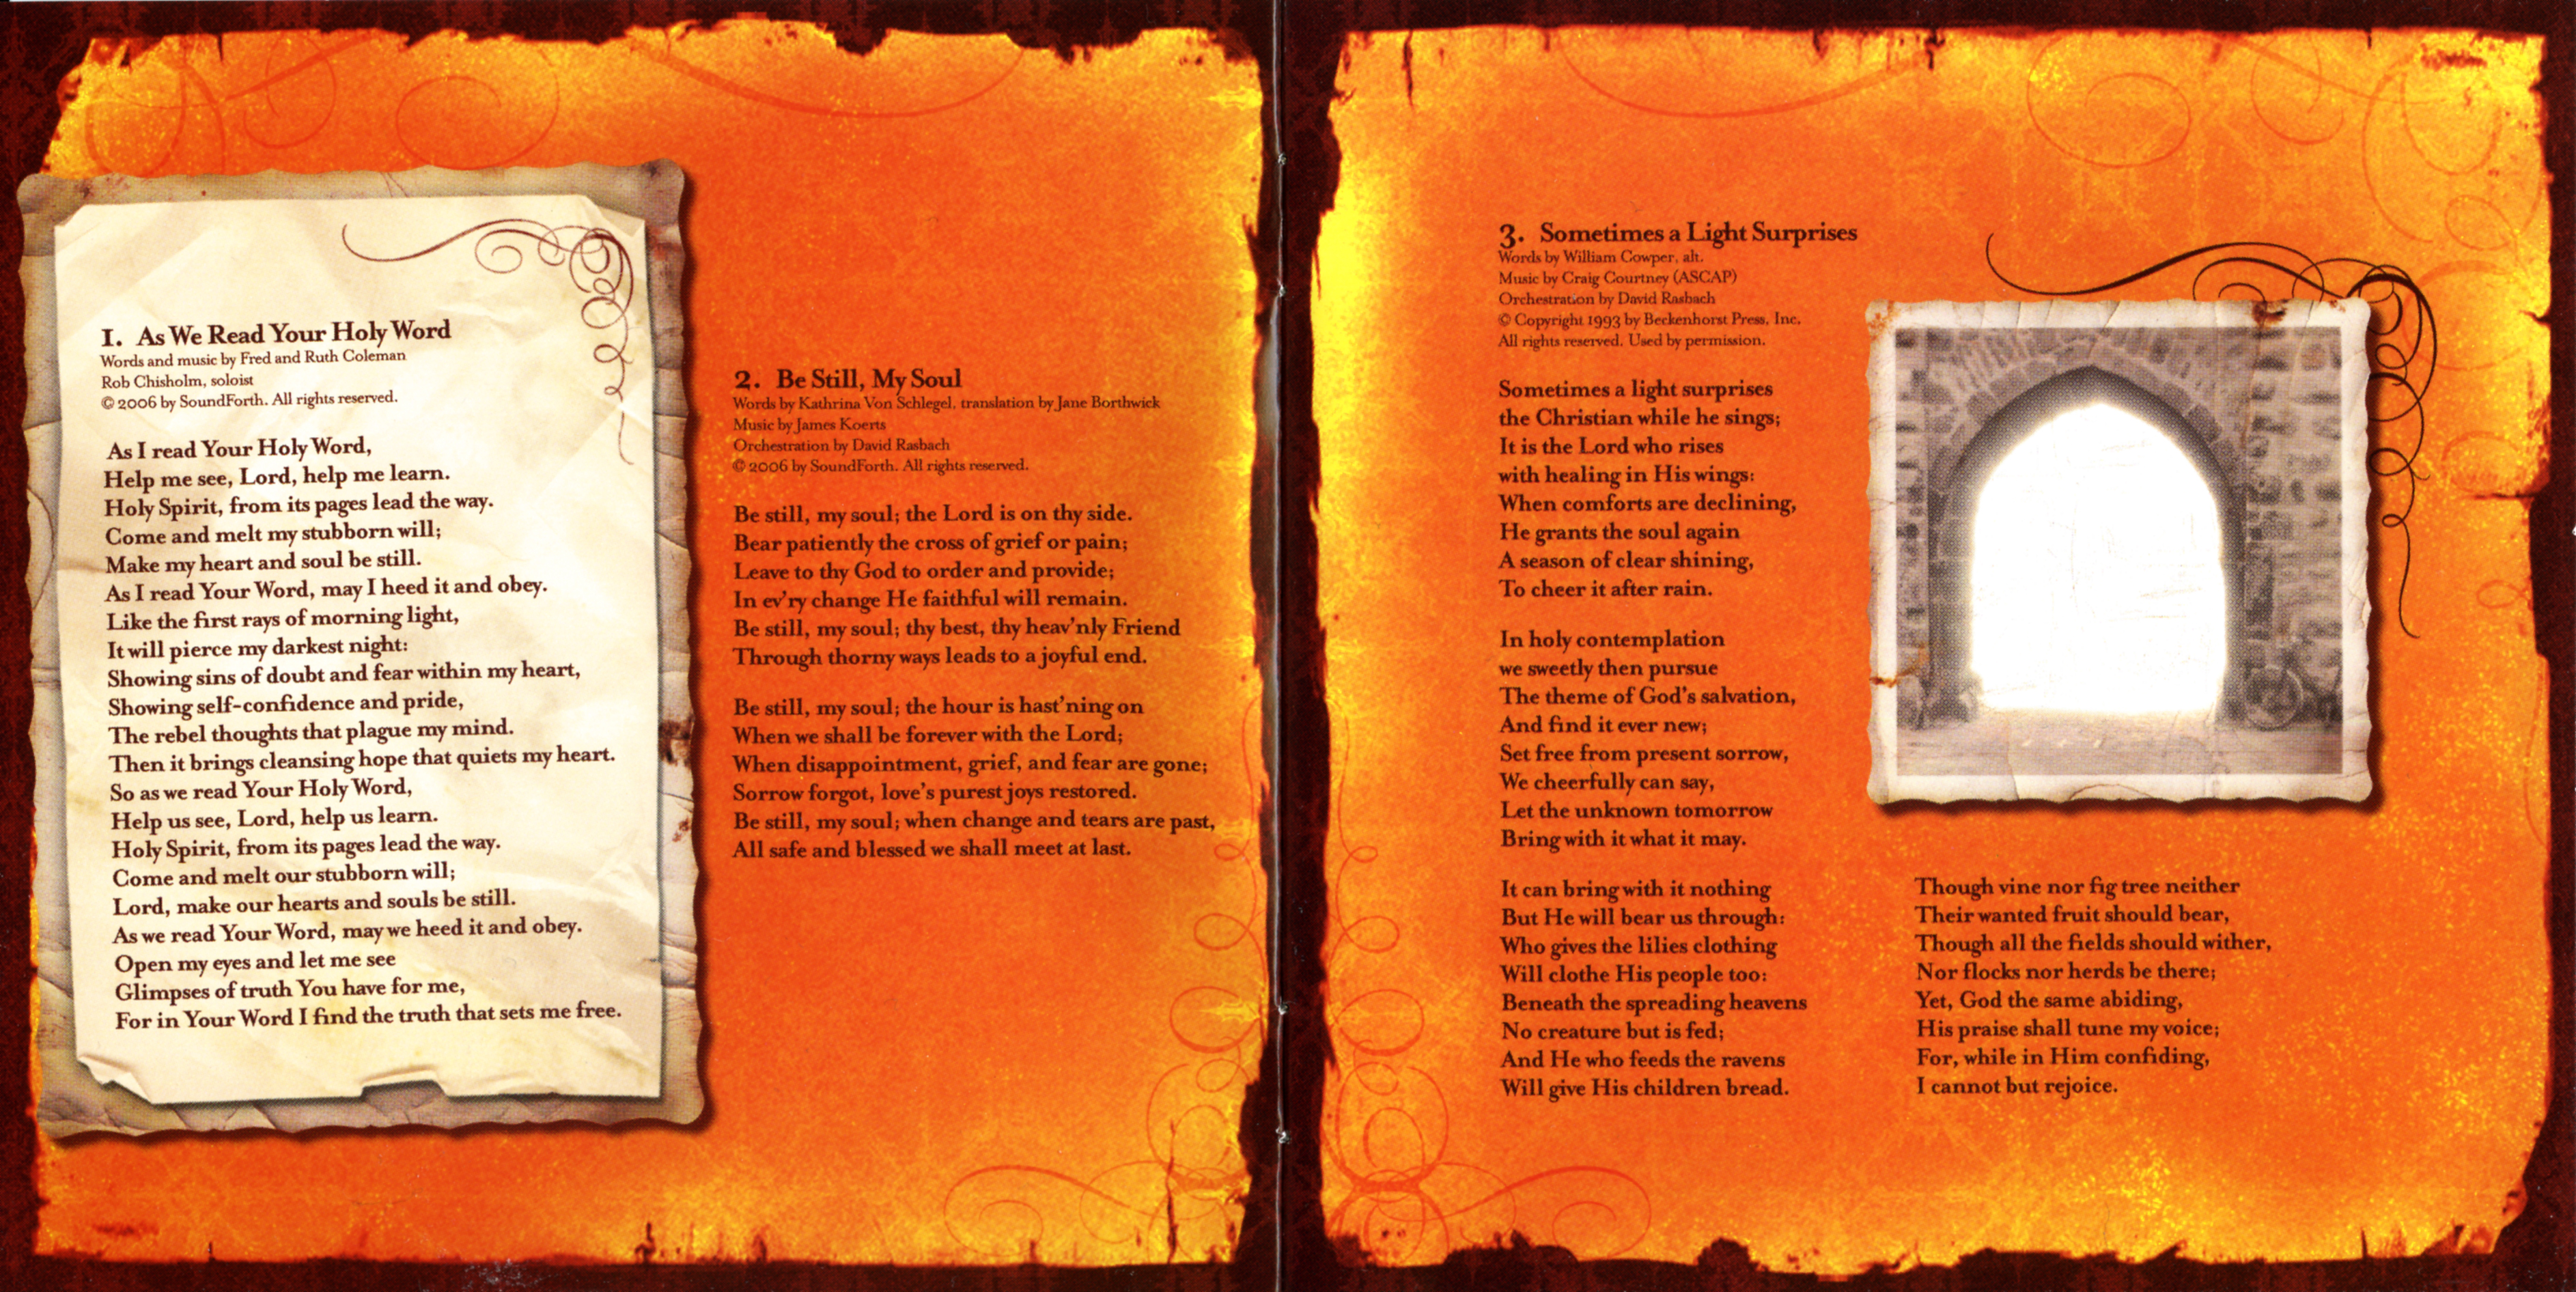 A_Quiet_Heart_The_Complete_CD_2006_Booklet_Side_1_To_2.jpg